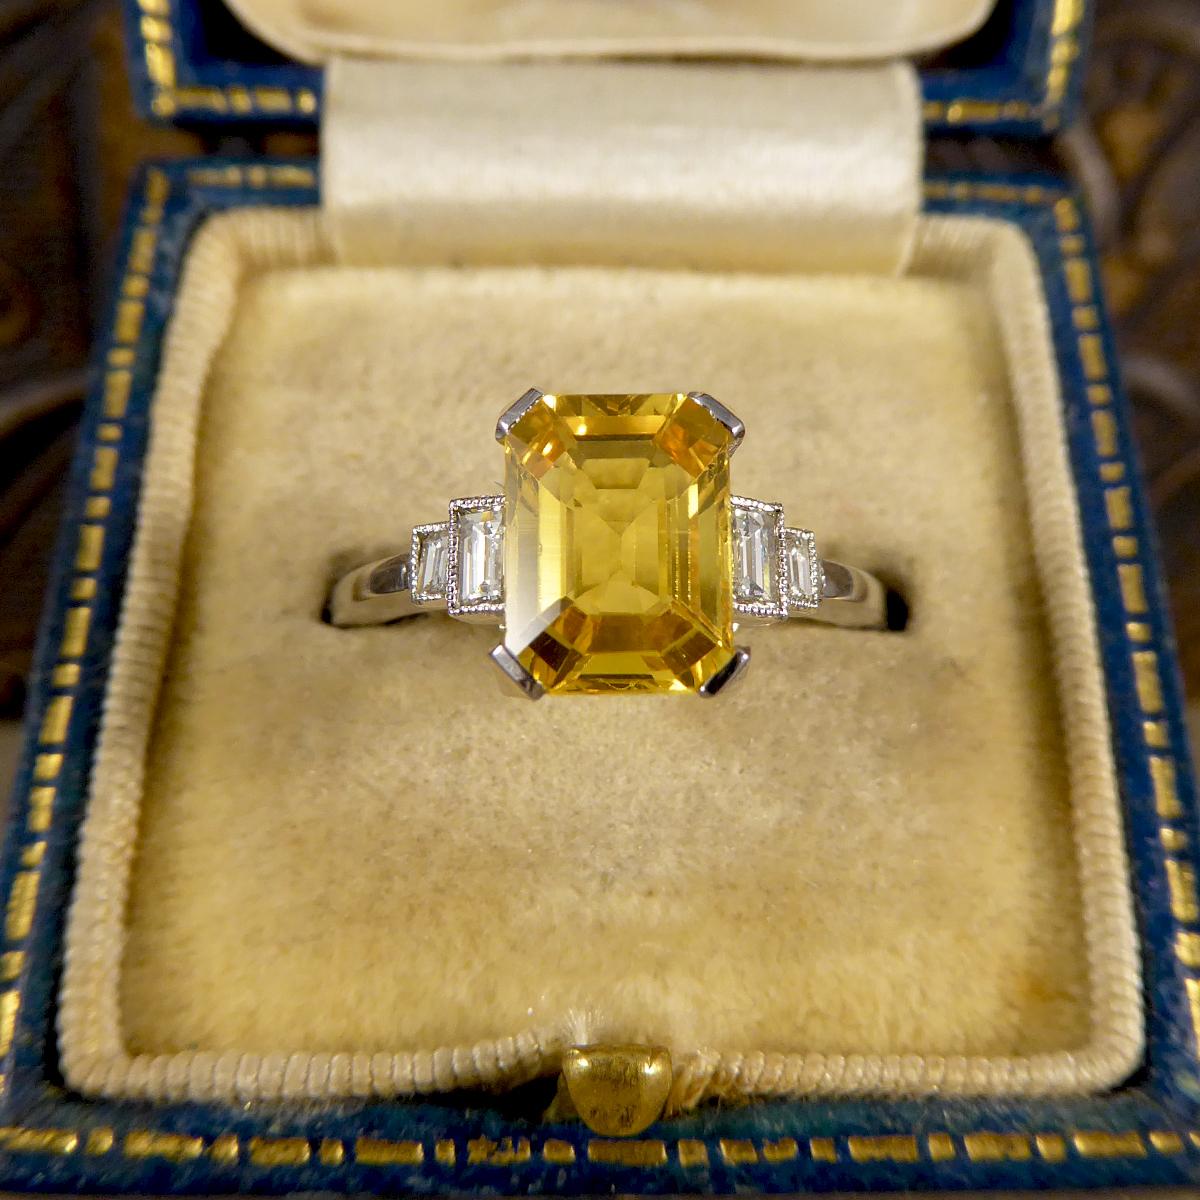 Contemporary Emerald Cut Yellow Sapphire with Baguette Cut Diamond Shoulders Ring in Platinum